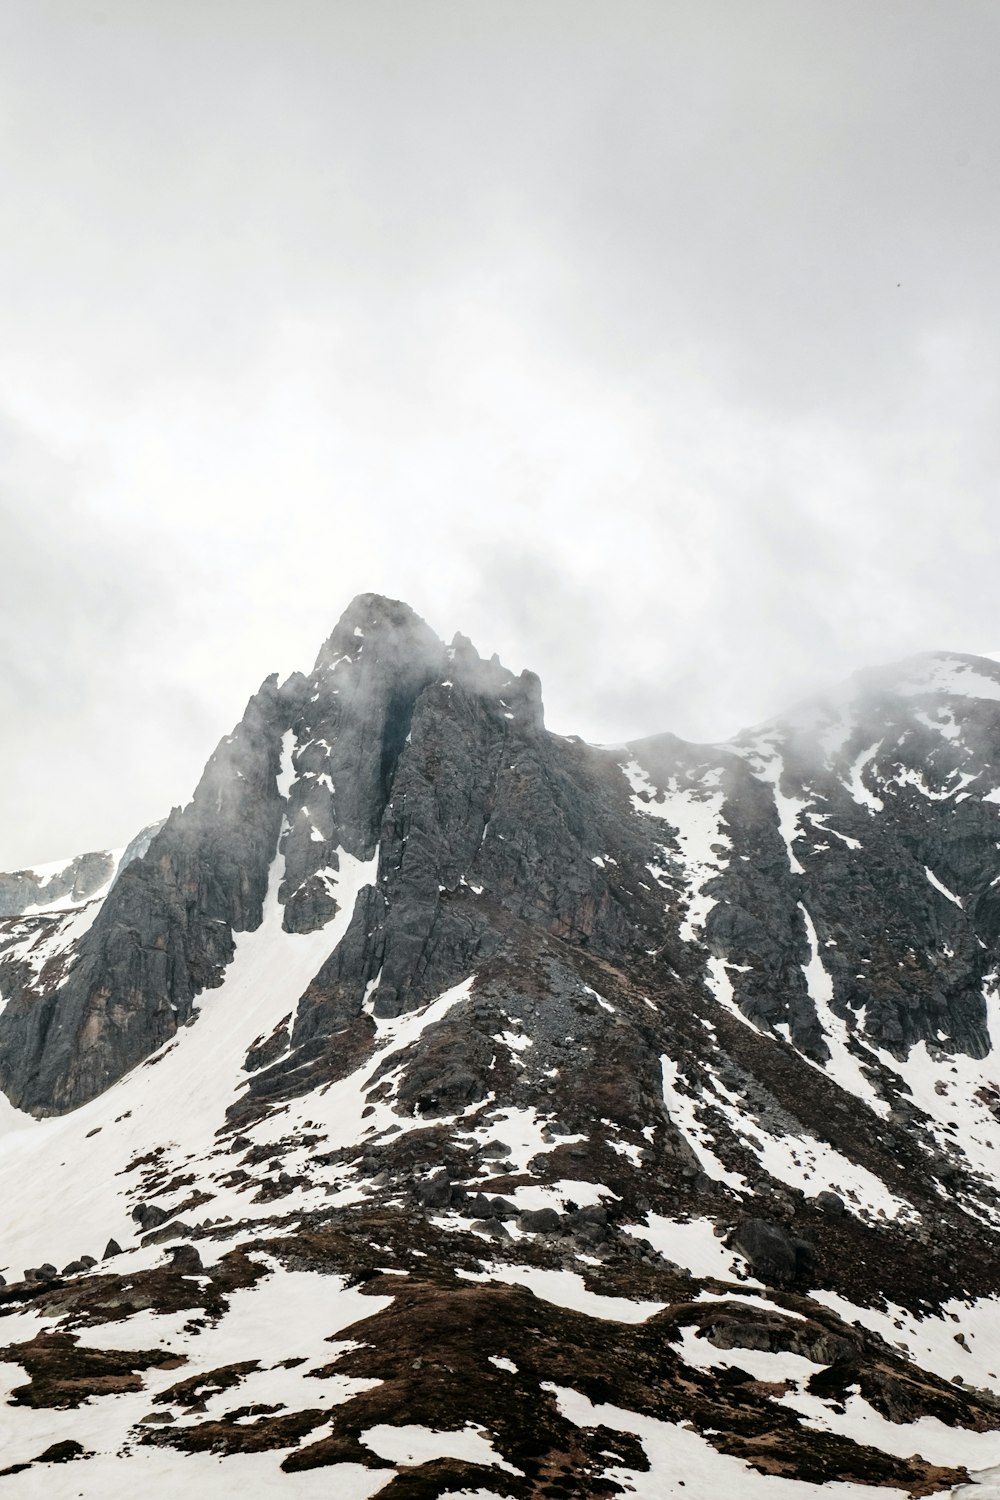 a mountain covered in snow and clouds on a cloudy day